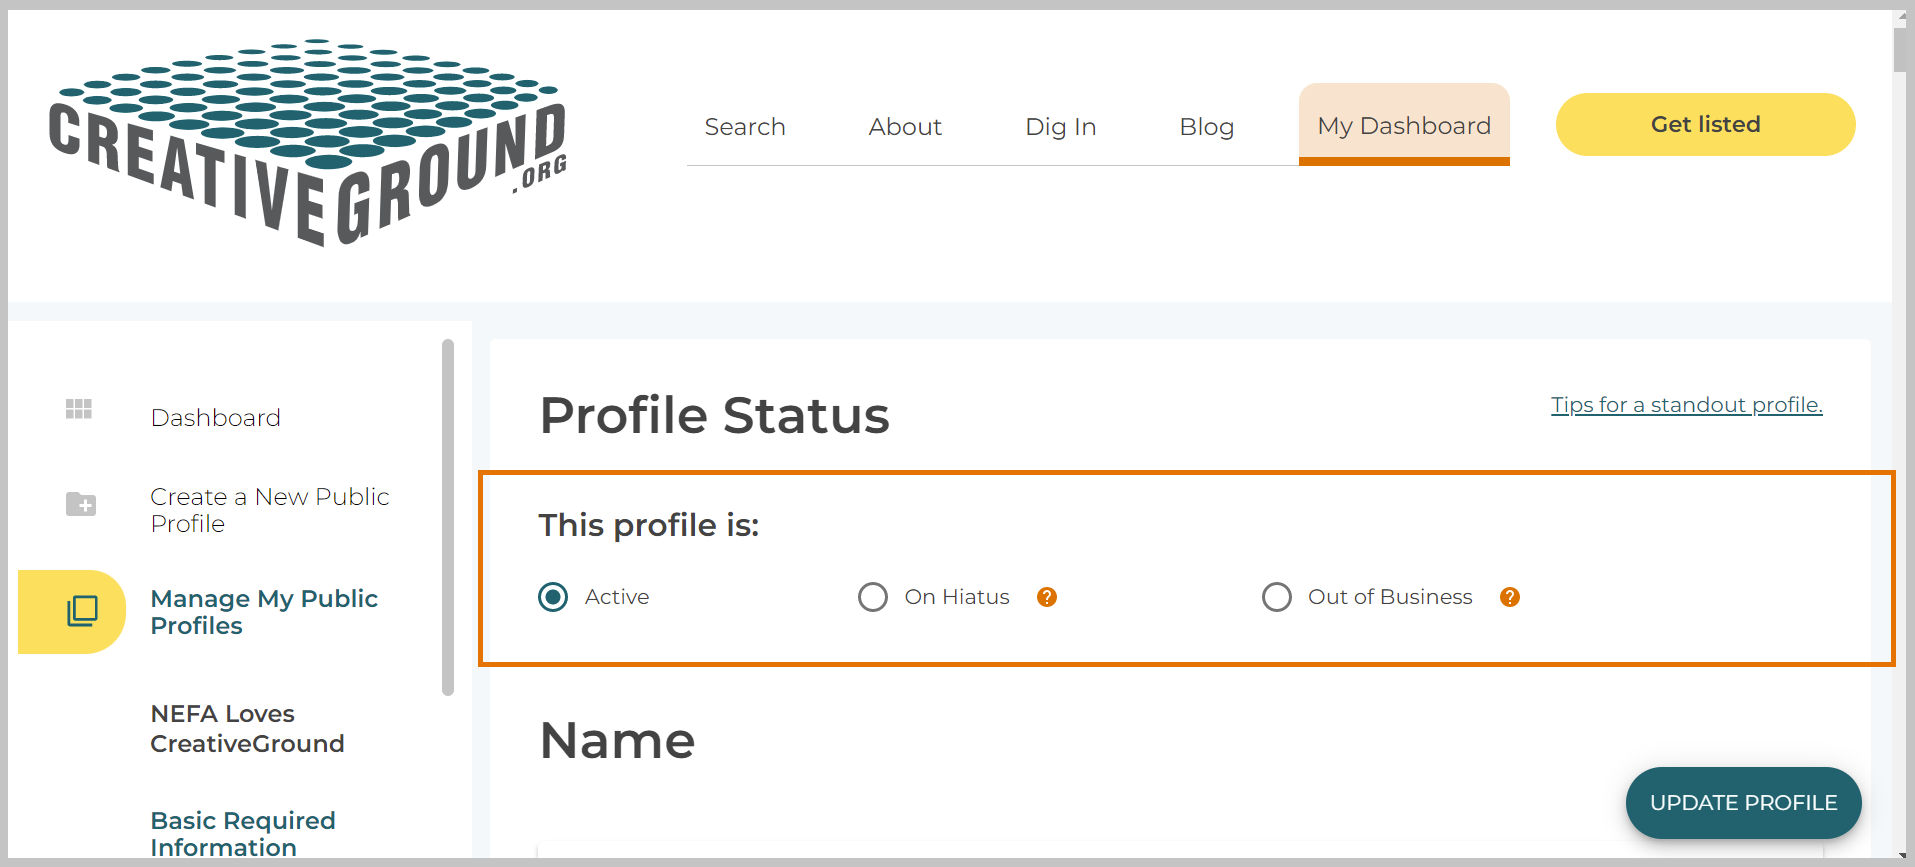 Screenshot showing that you can select Active, On Hiatus, or Out of Business status for a profile